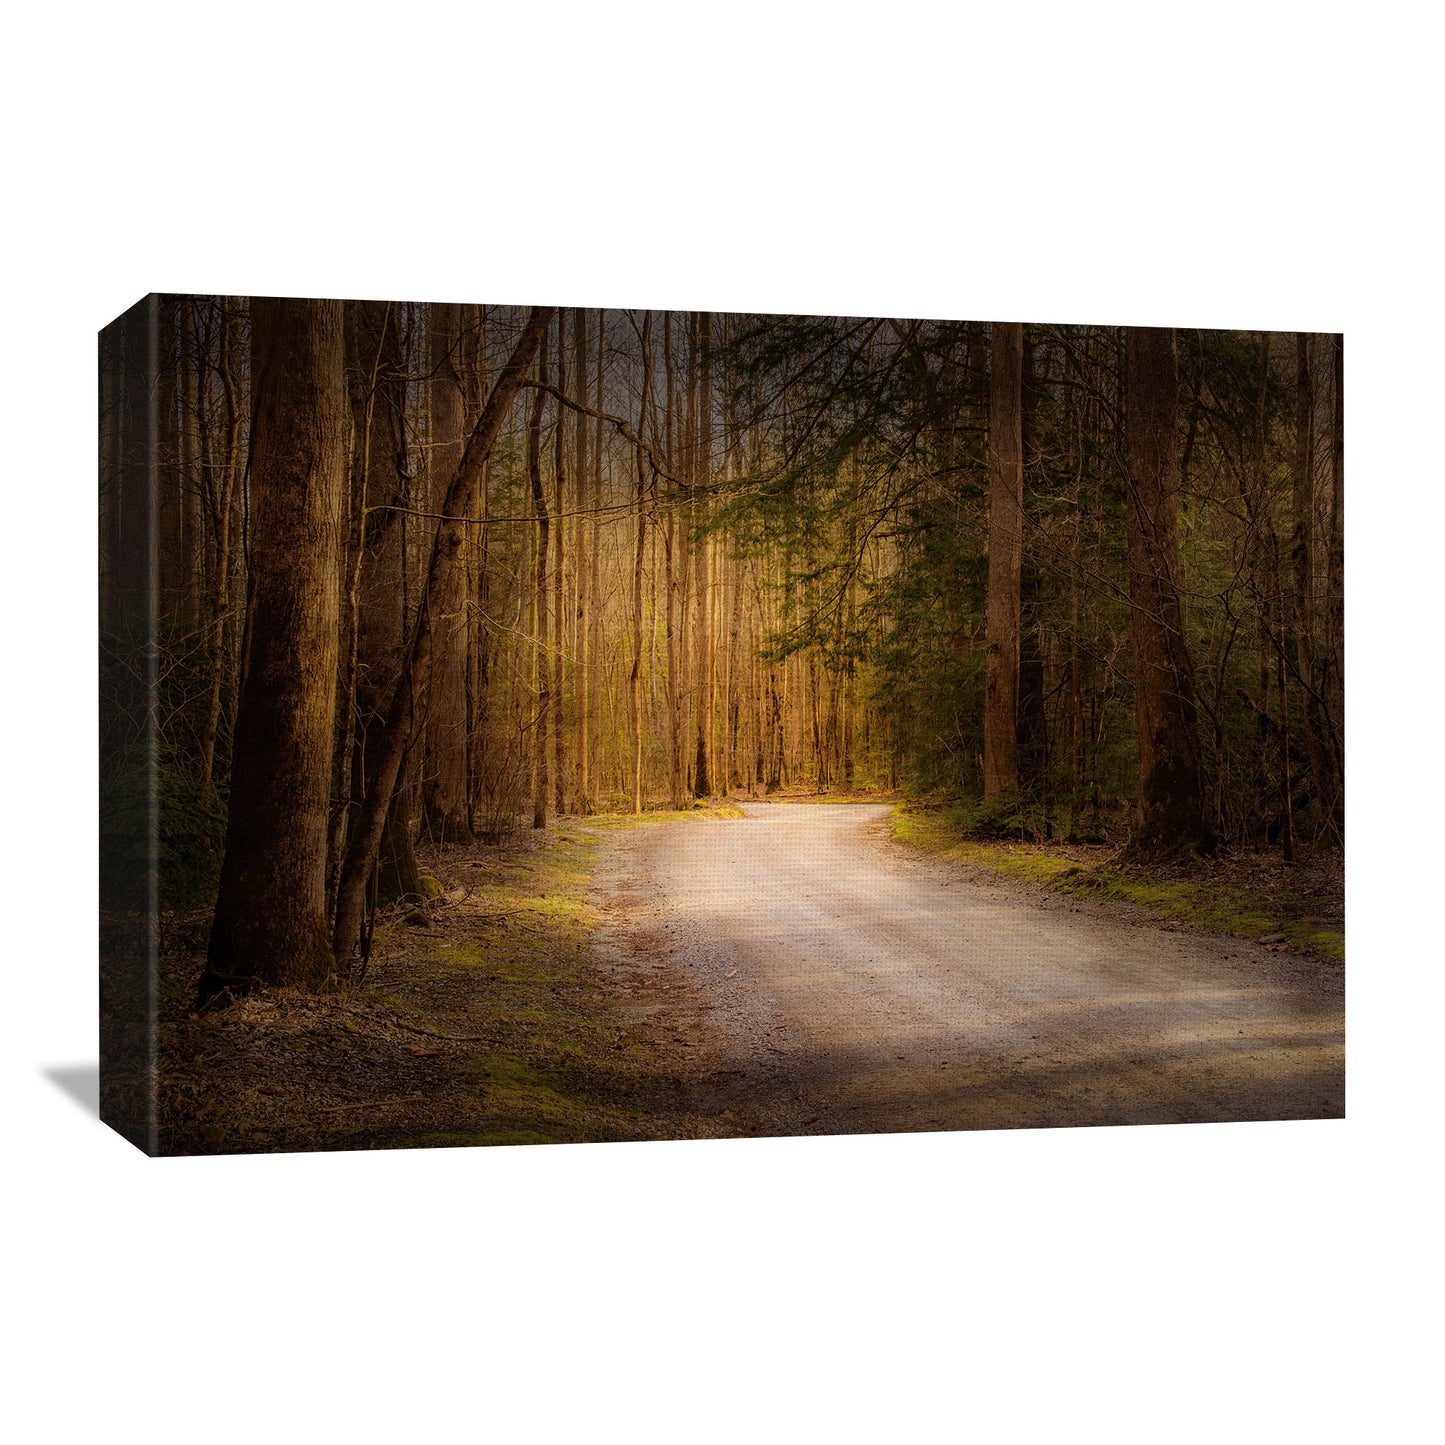 Wall art canvas featuring a dark and moody forest road with the sunlight streaming through the trees